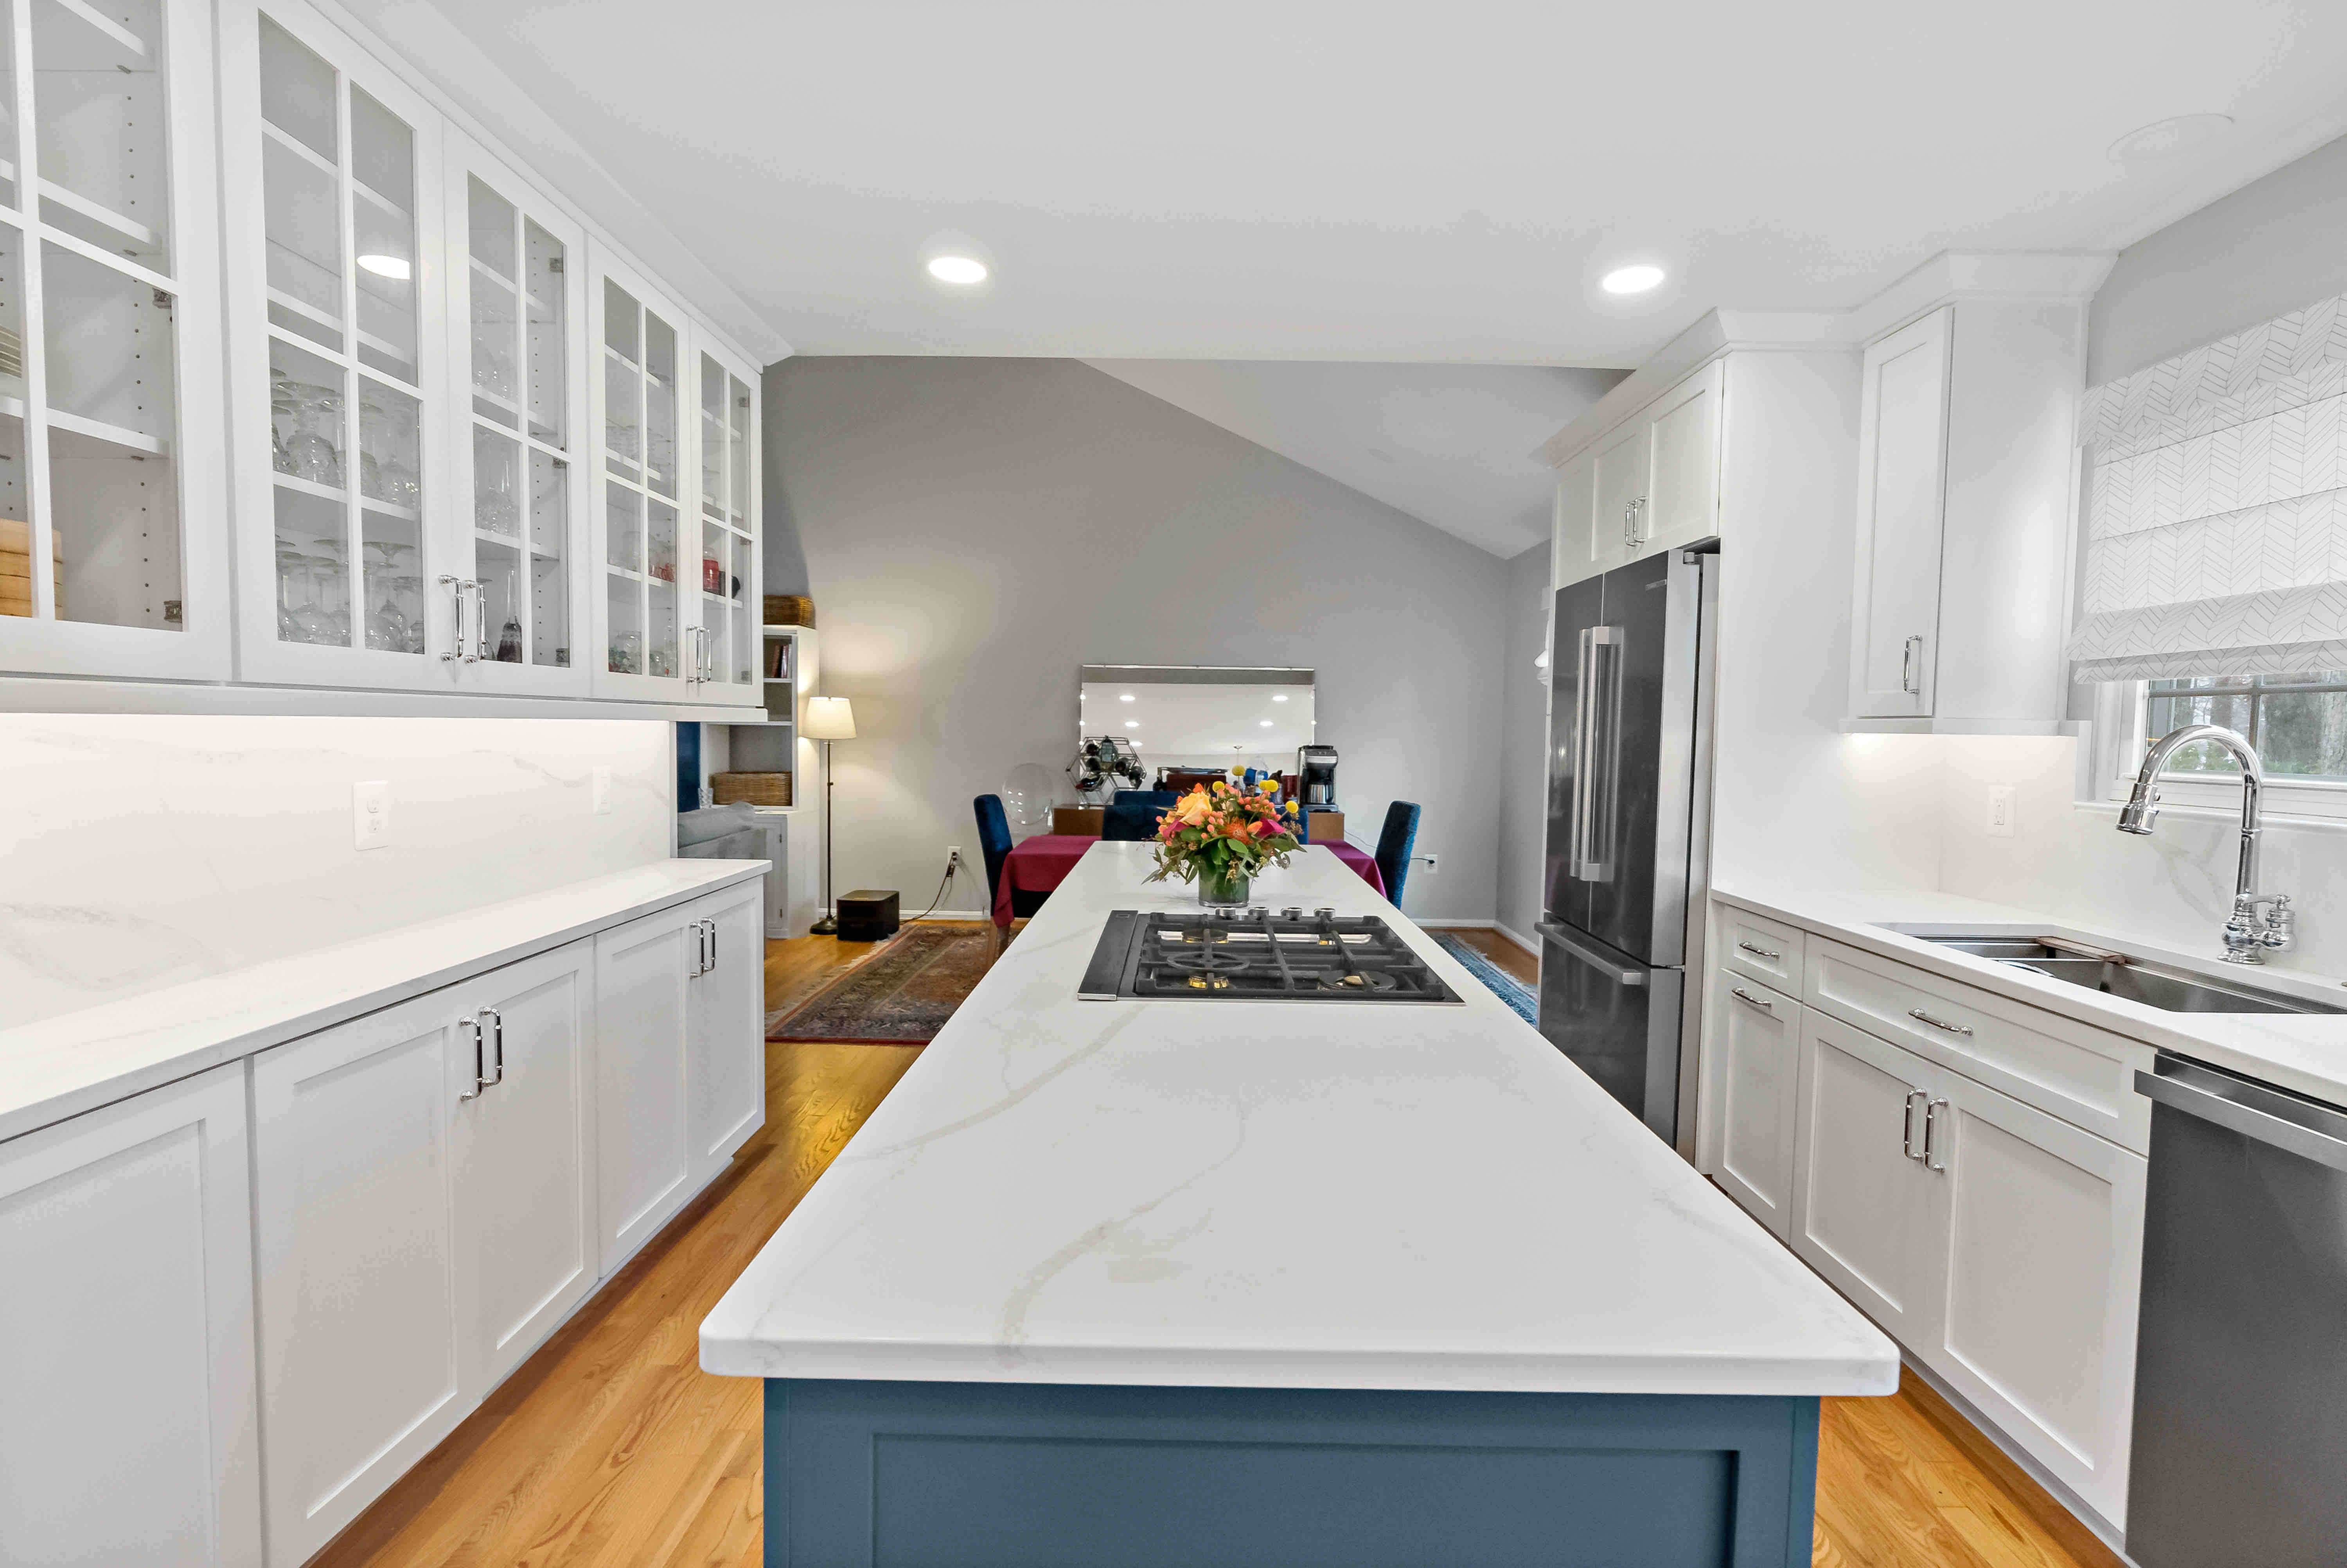 Long kitchen area with white cabinets